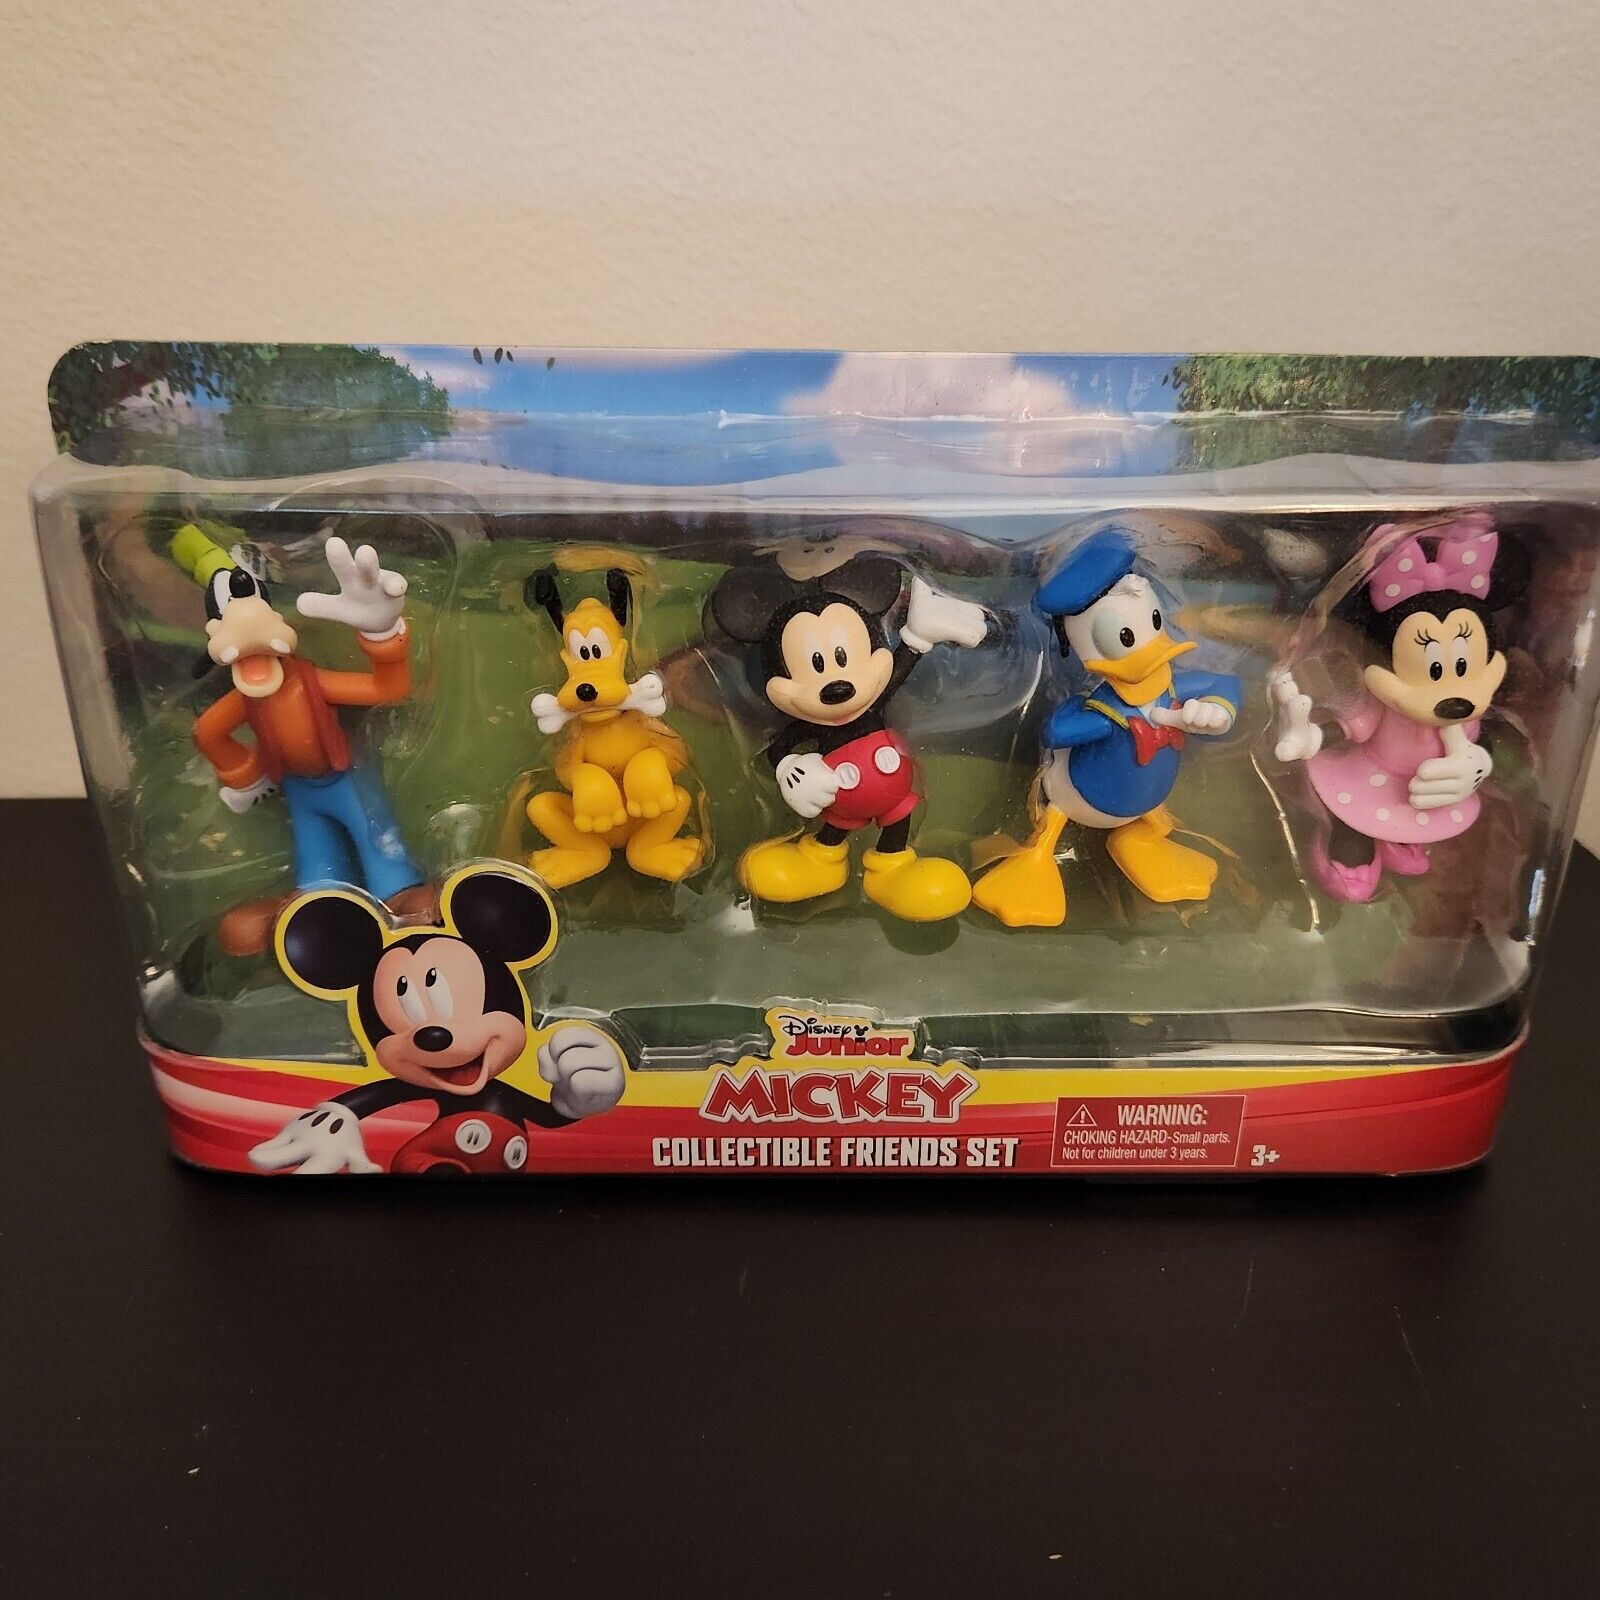 Disney Junior Mickey Mouse Collectible Friends 3 inch Figure Set Fun Decorations